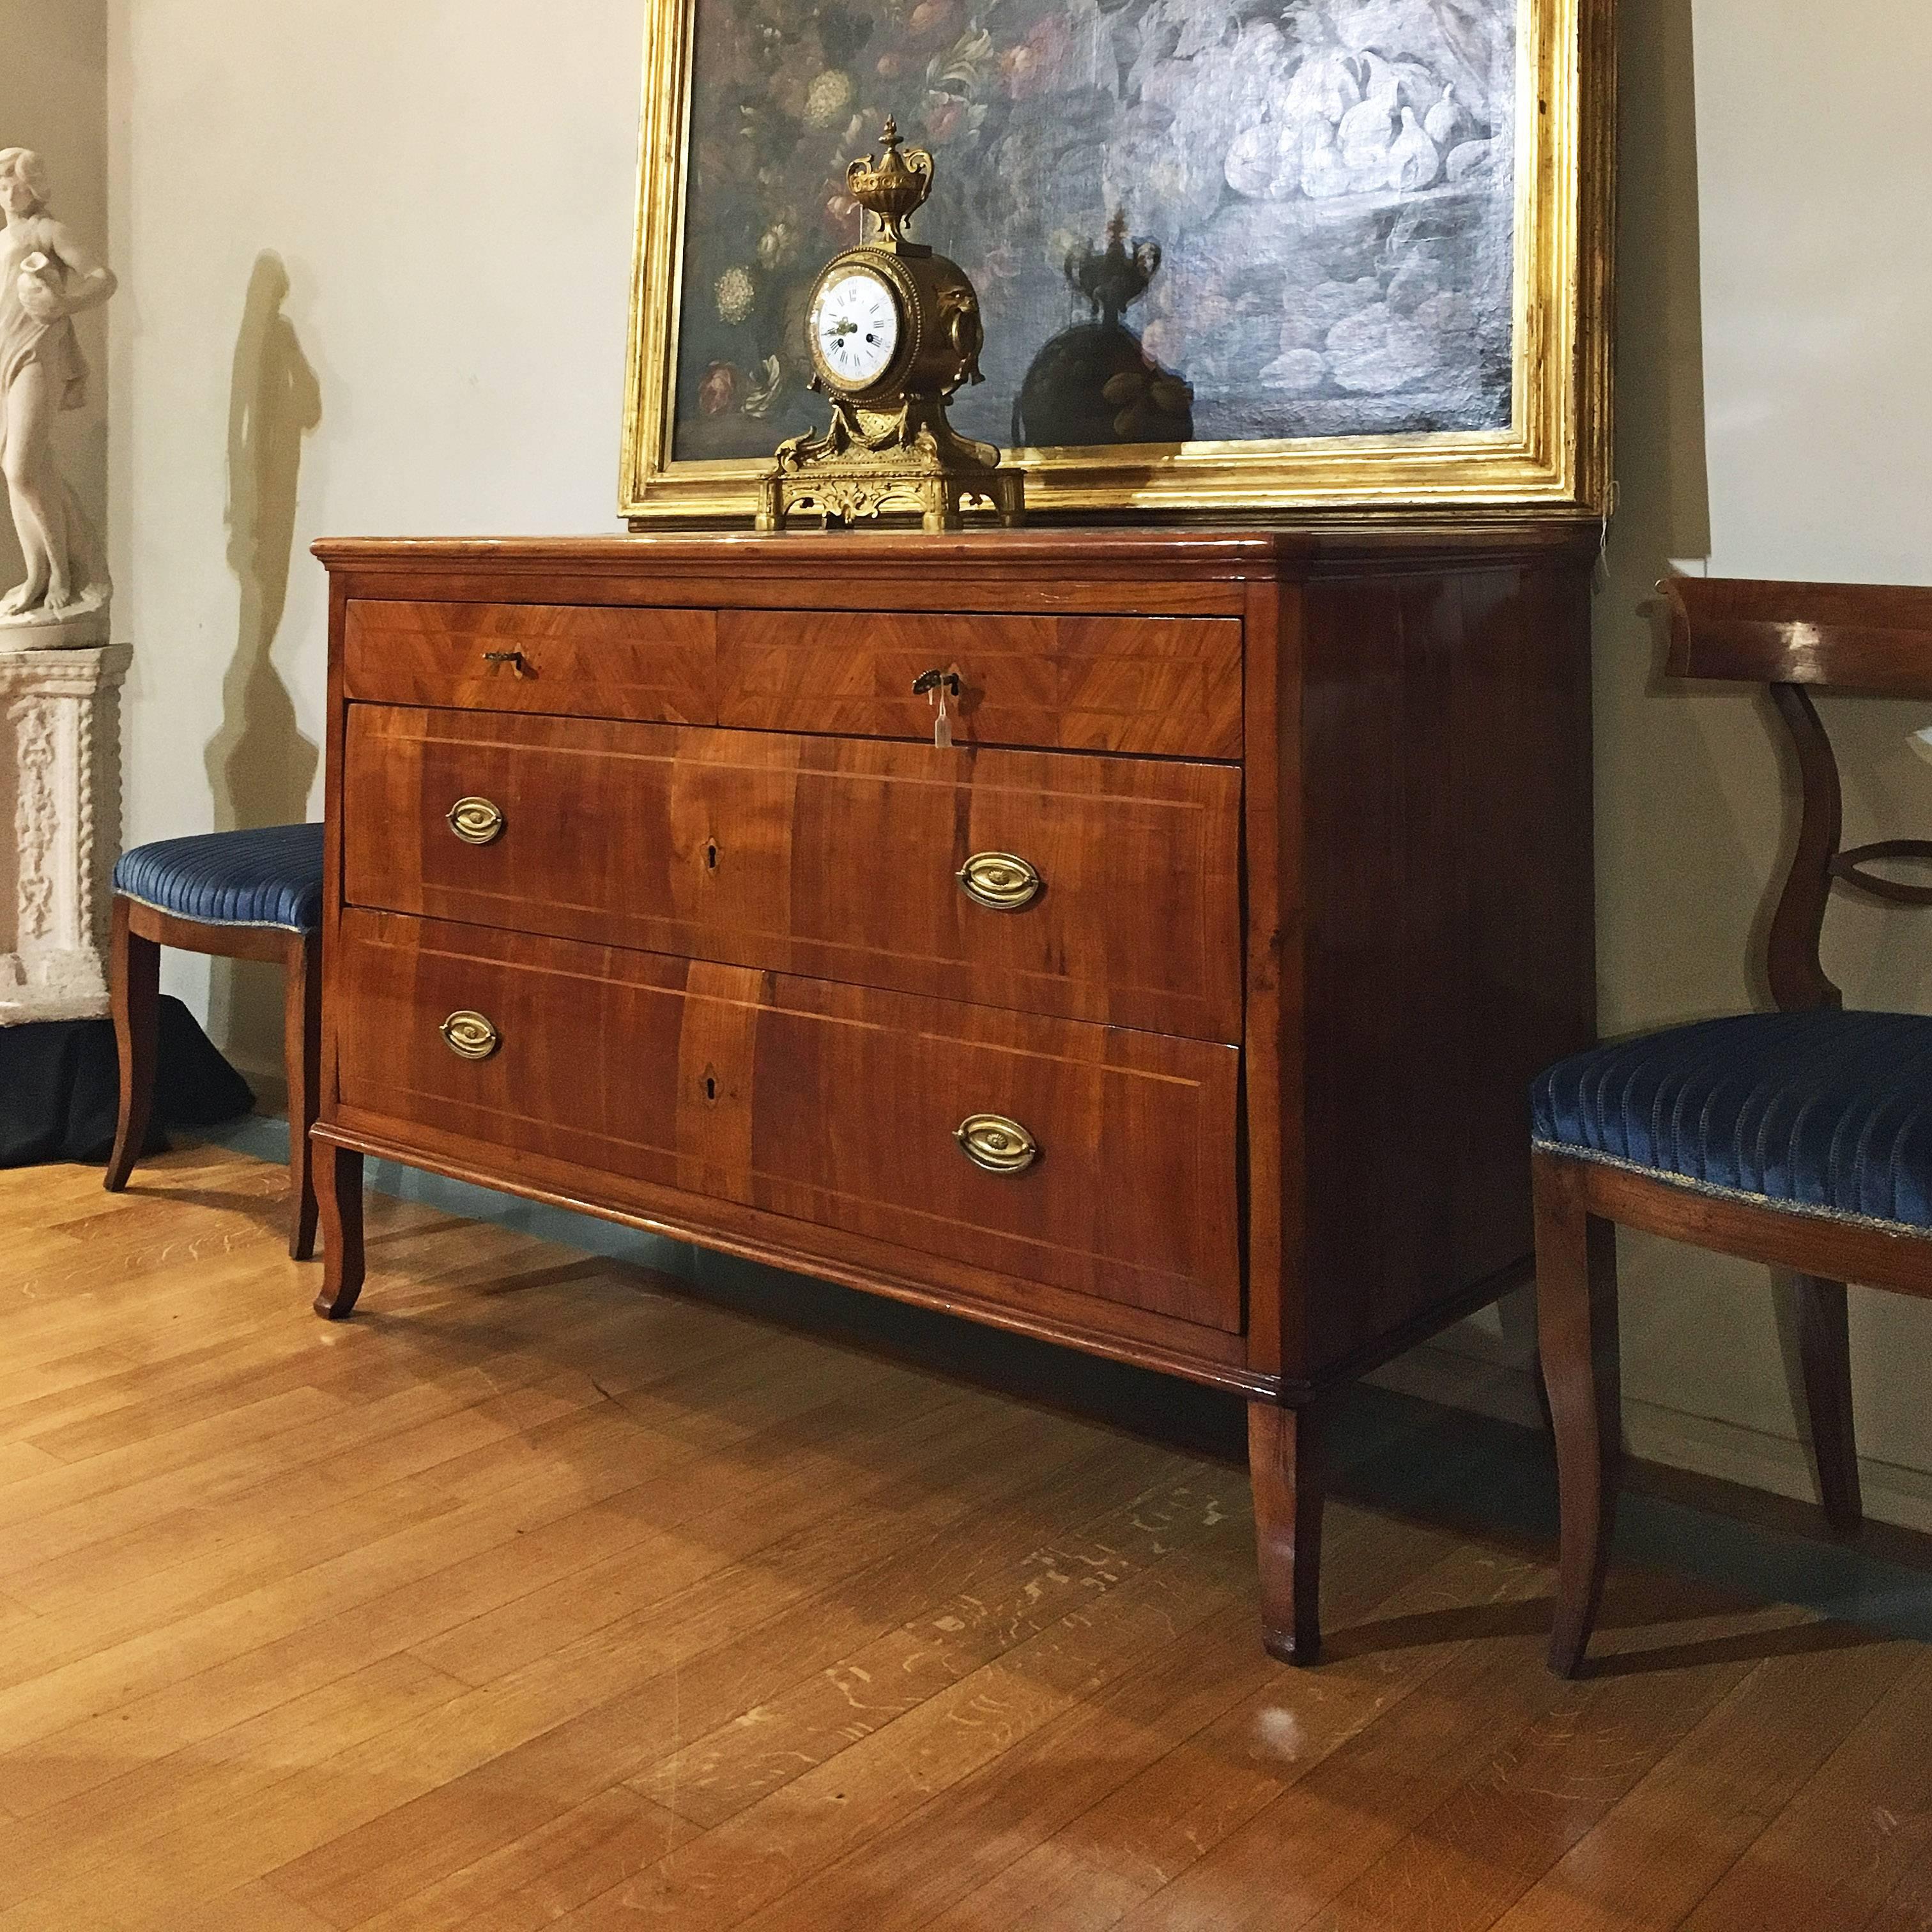 A beautiful Italian chest of drawers or commode in solid walnut wood with inlays in walnut and fillets in palisander. Shaped front, with four drawers. The bronzes of the locks and the keys are original, Venetia, end of the 18th century.